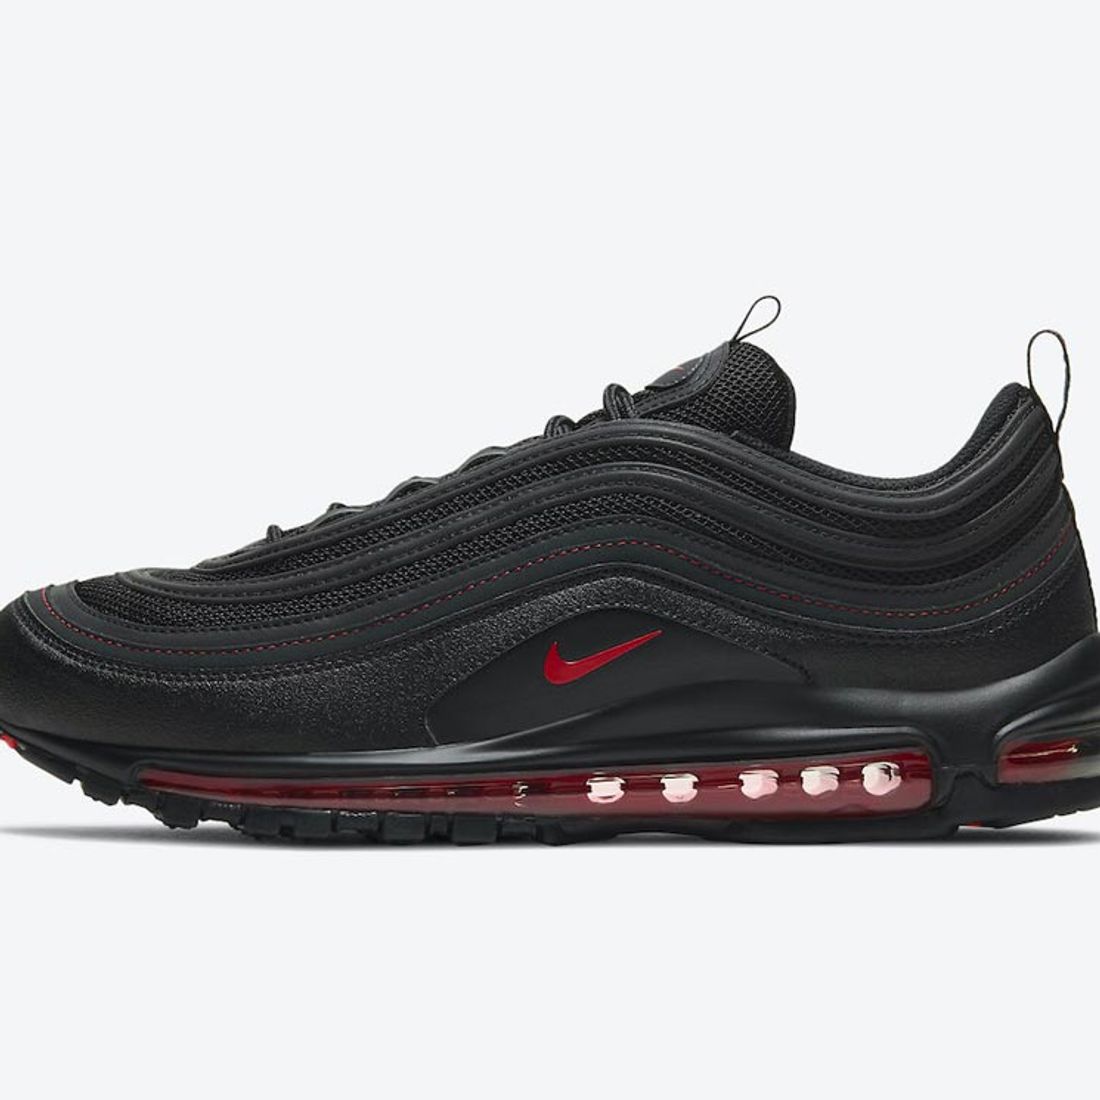 Nike Air Max 97 Broods in Black and Red - Freaker